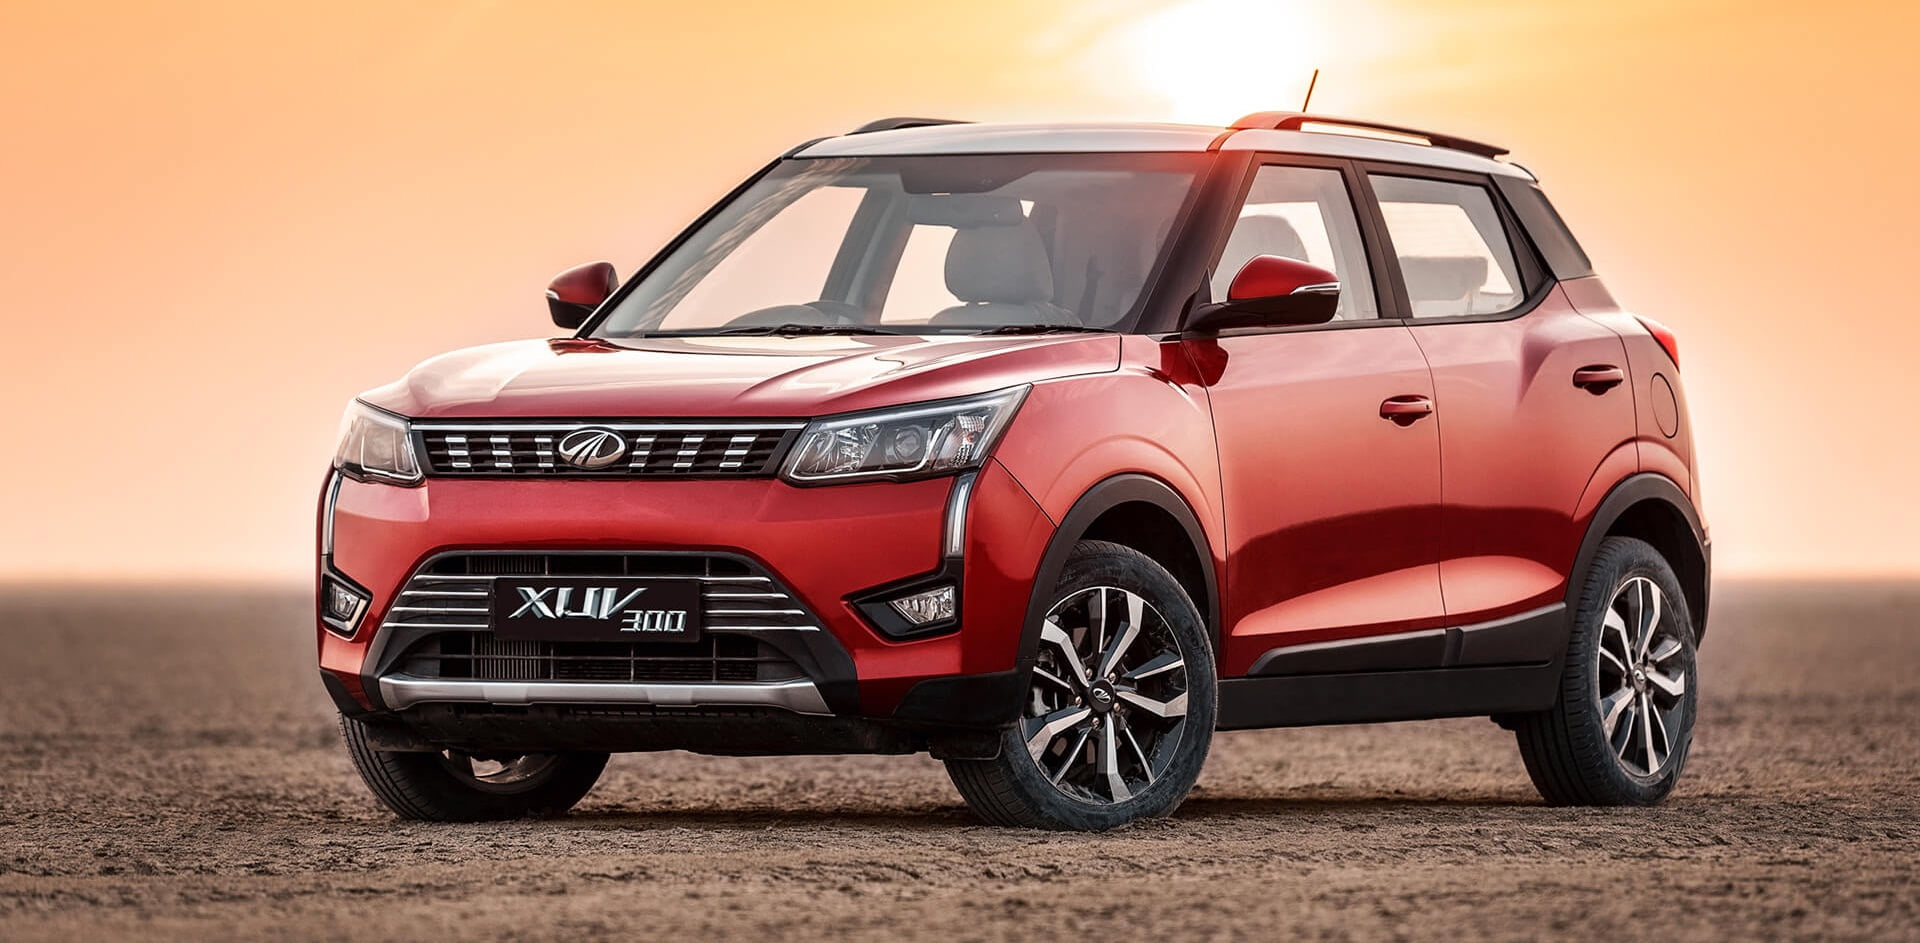 mahindra xuv300 launched details pictures specs price